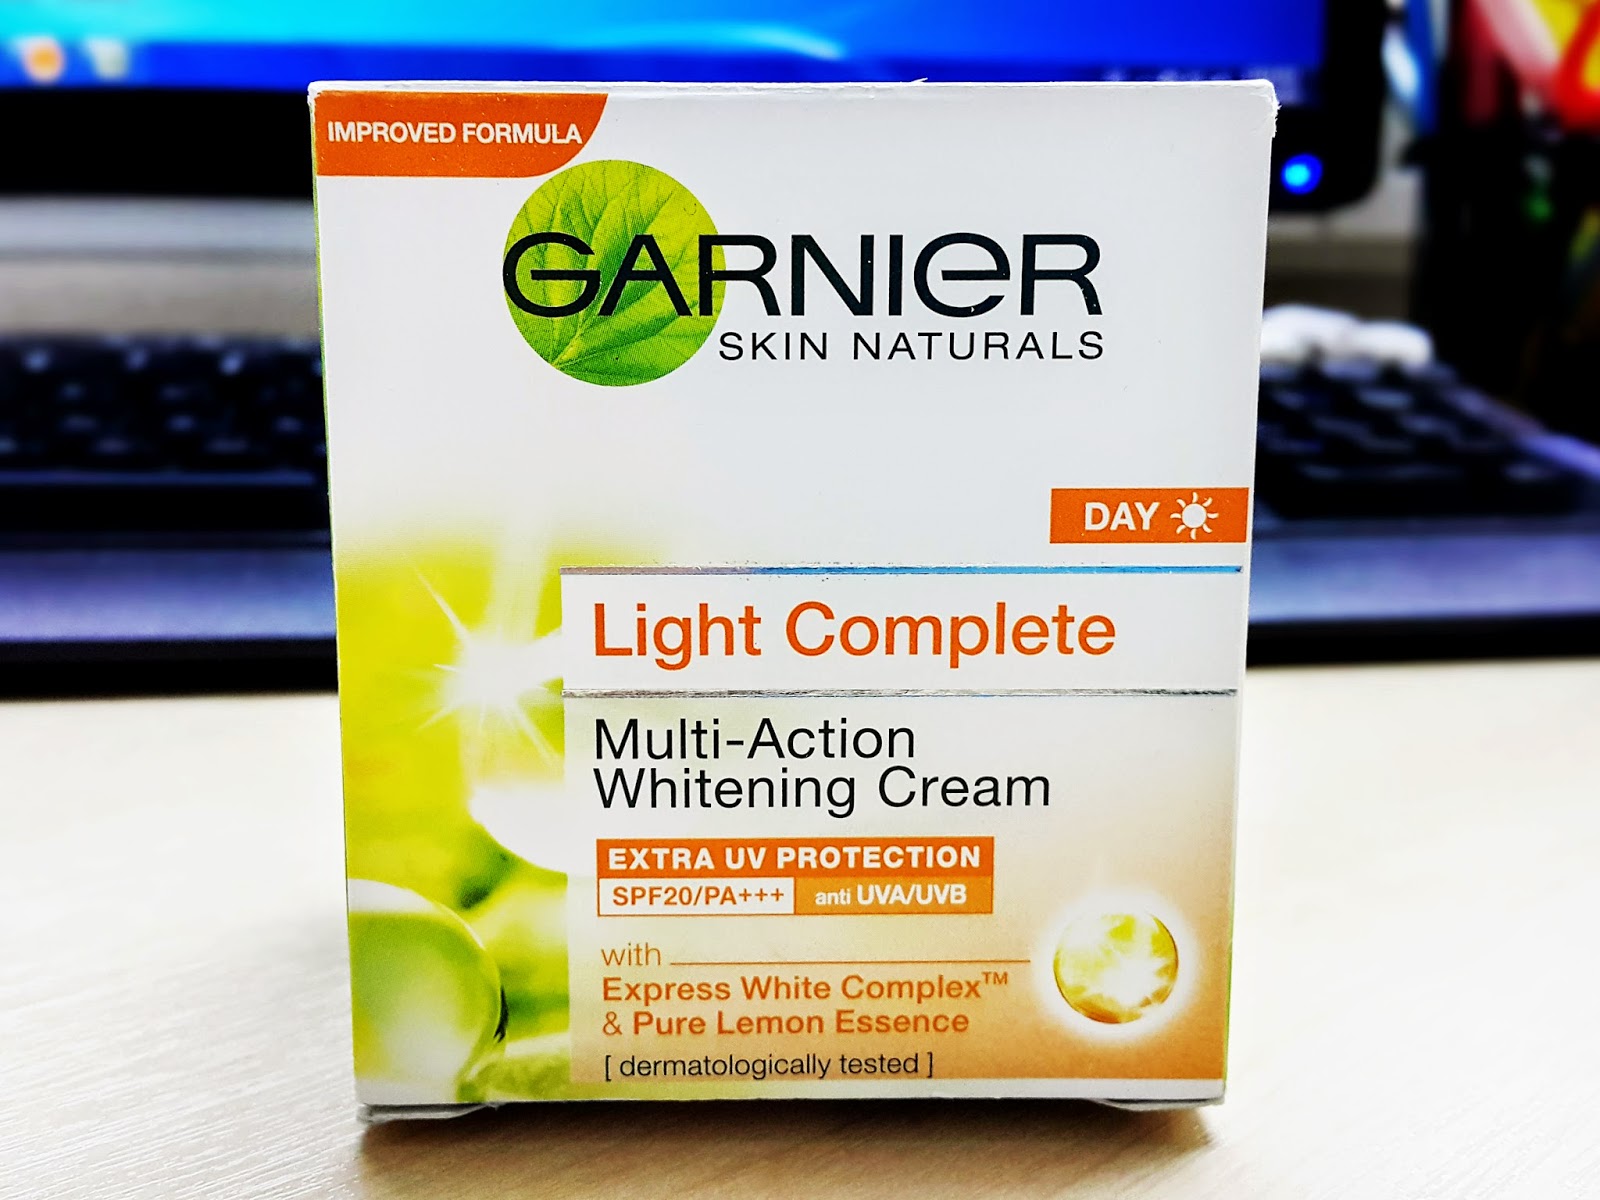 [Review] Garnier Light Complete Multi-Action Whitening Cream - Just An